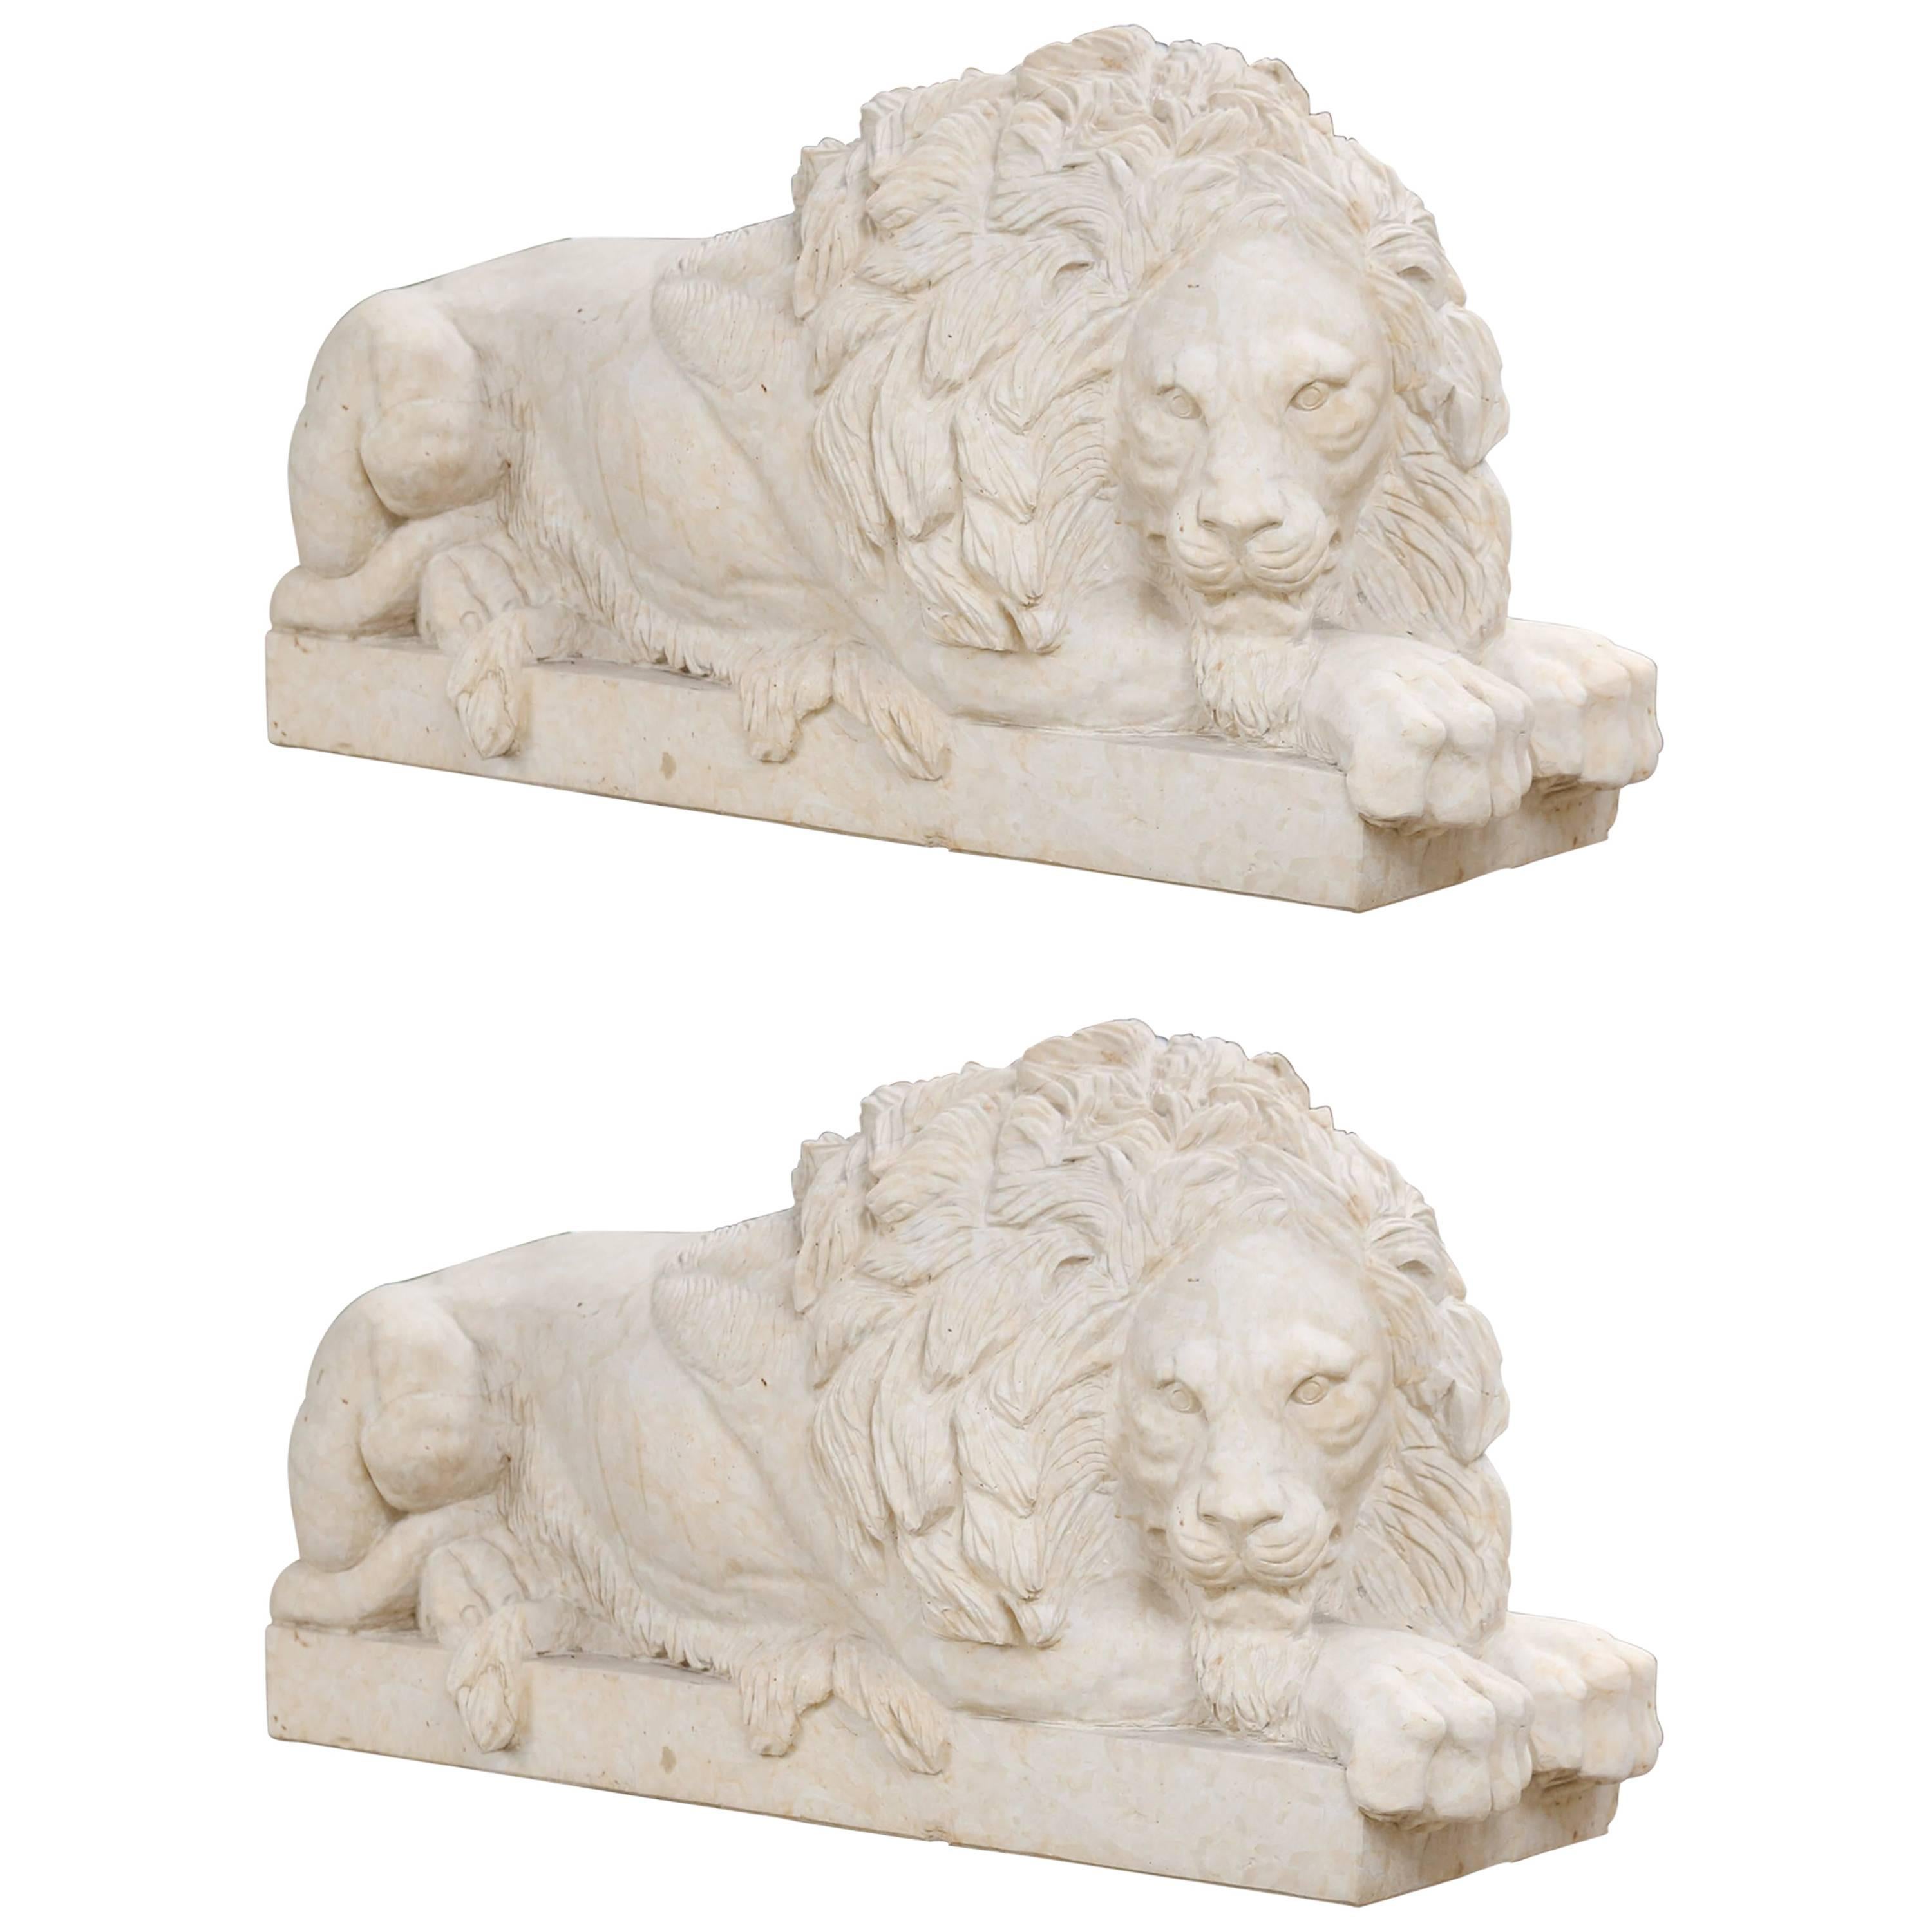 Pair of Large and Impressive Carved Marble Lion Garden Statues on Pedestals